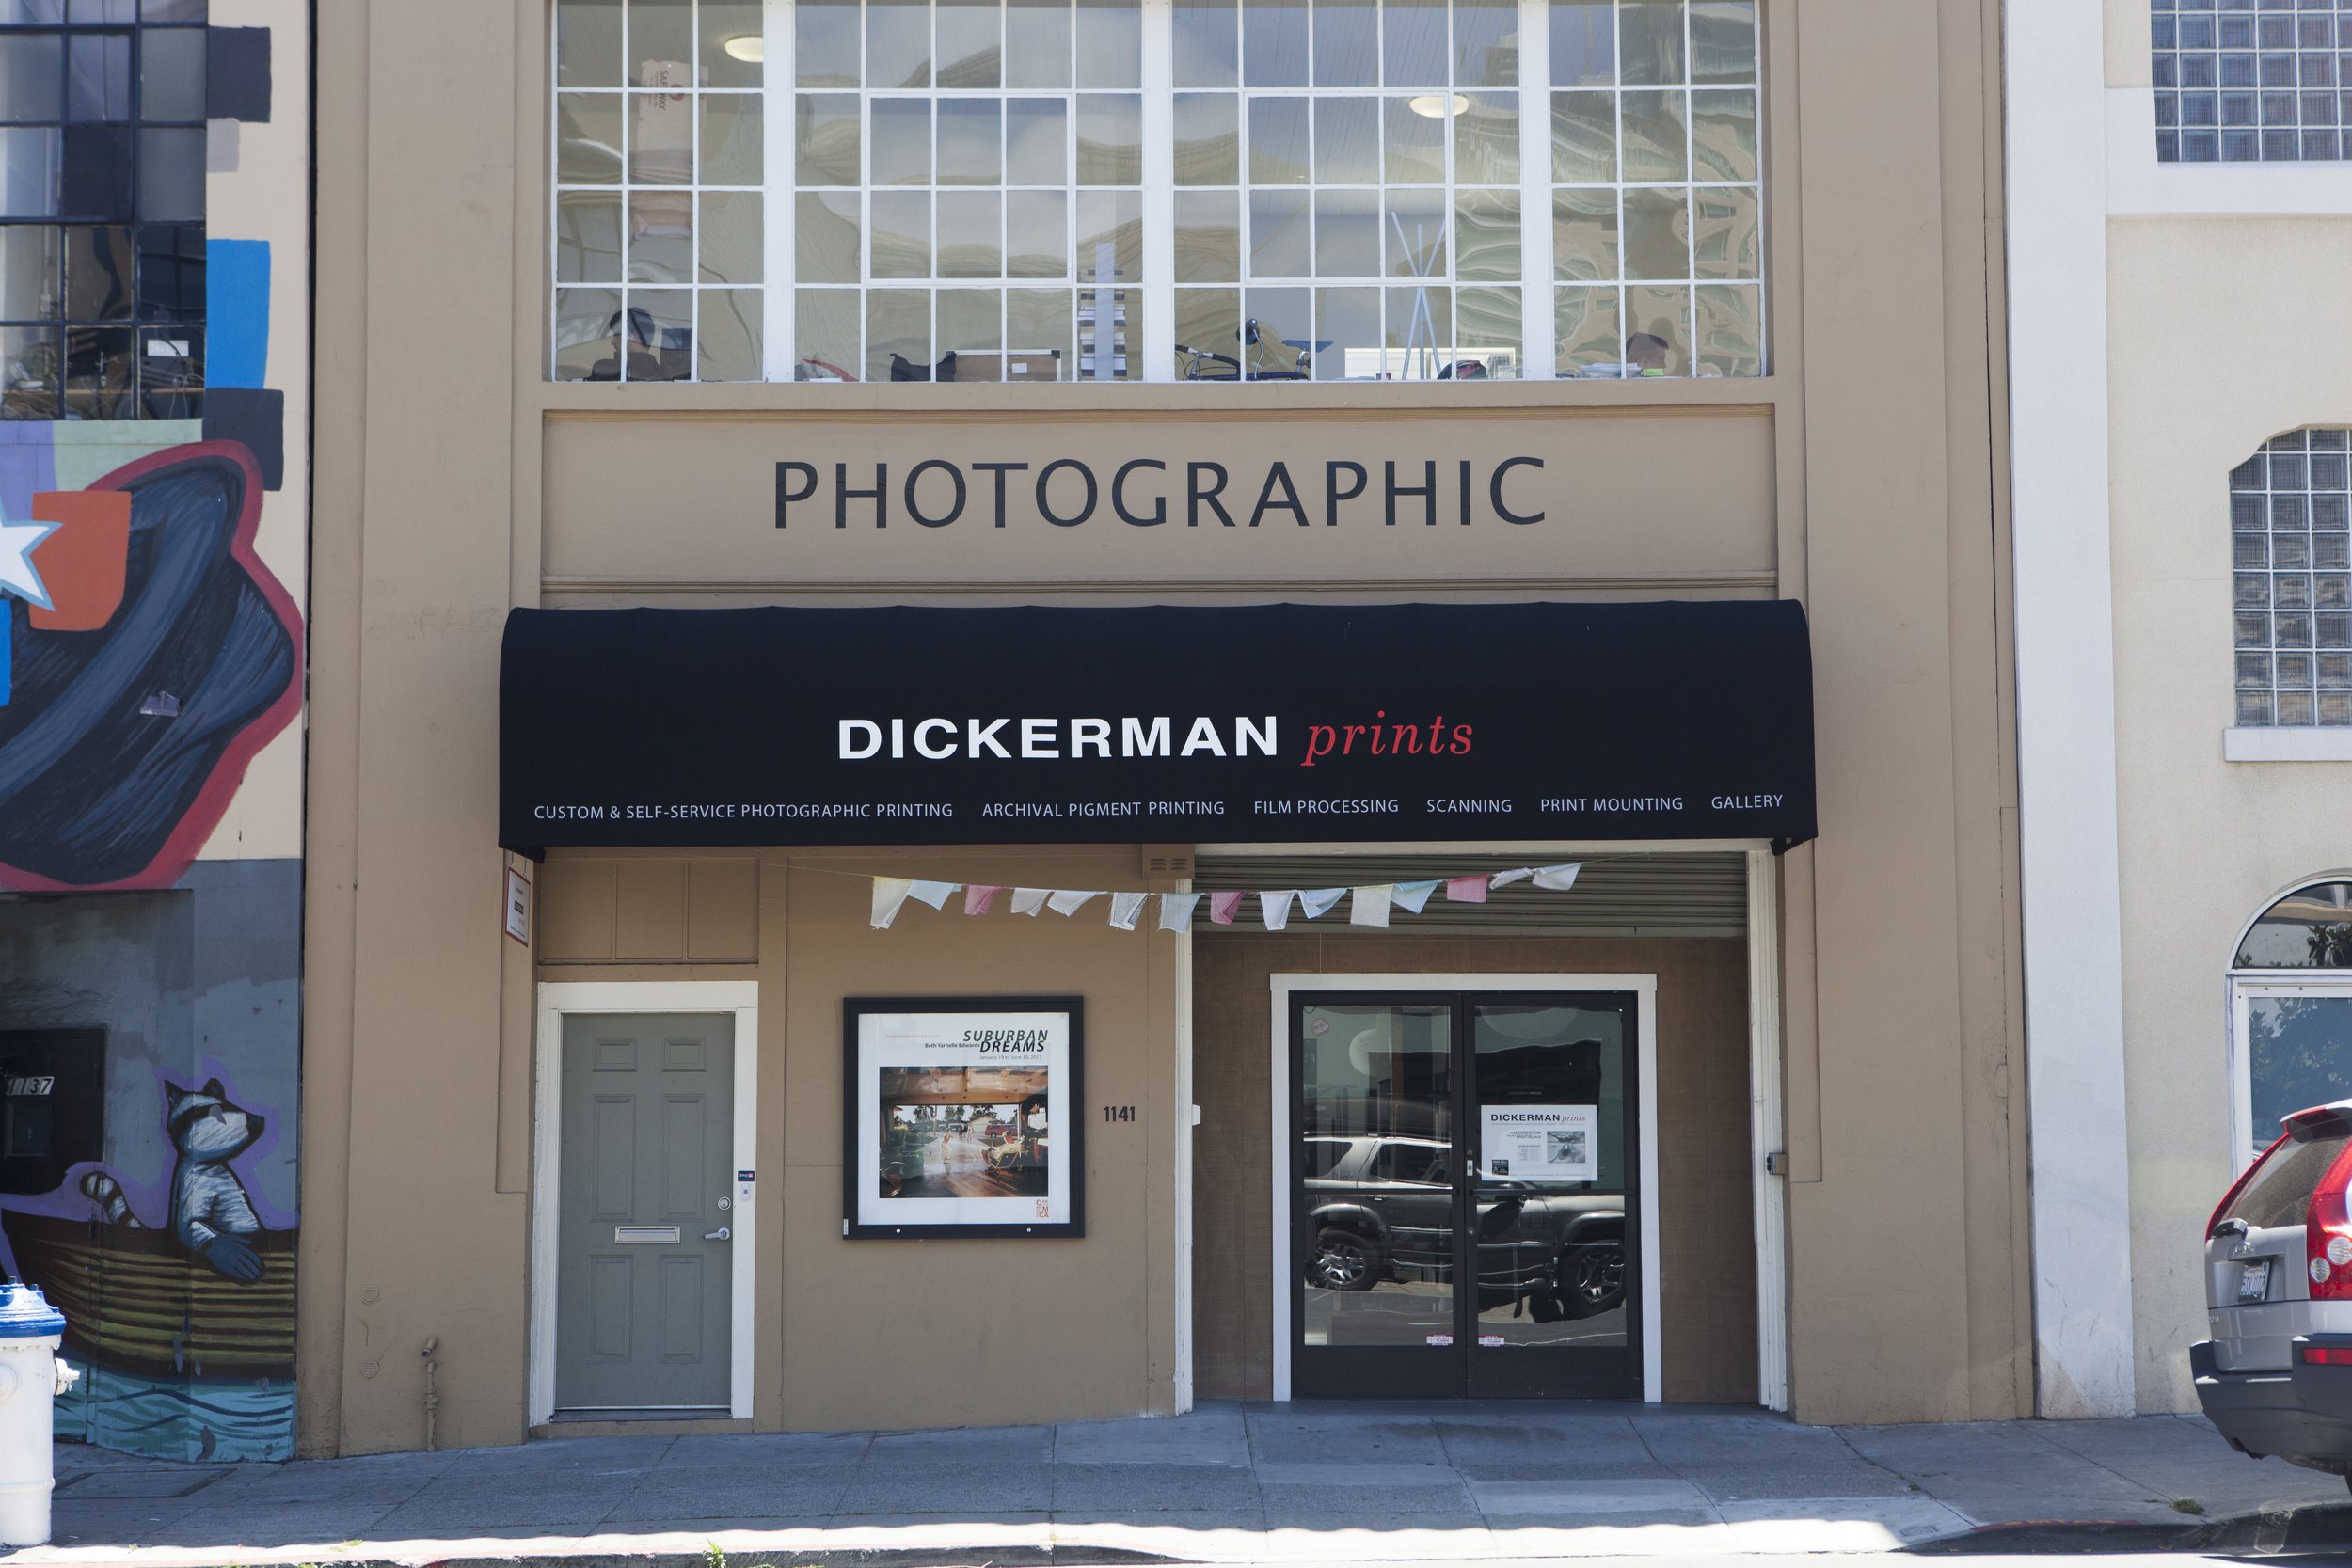  Here's what our print shop looks like from across the street. We are conveniently located at  1141 Howard Street  in San Francisco.  We've got plenty of  street parking!   